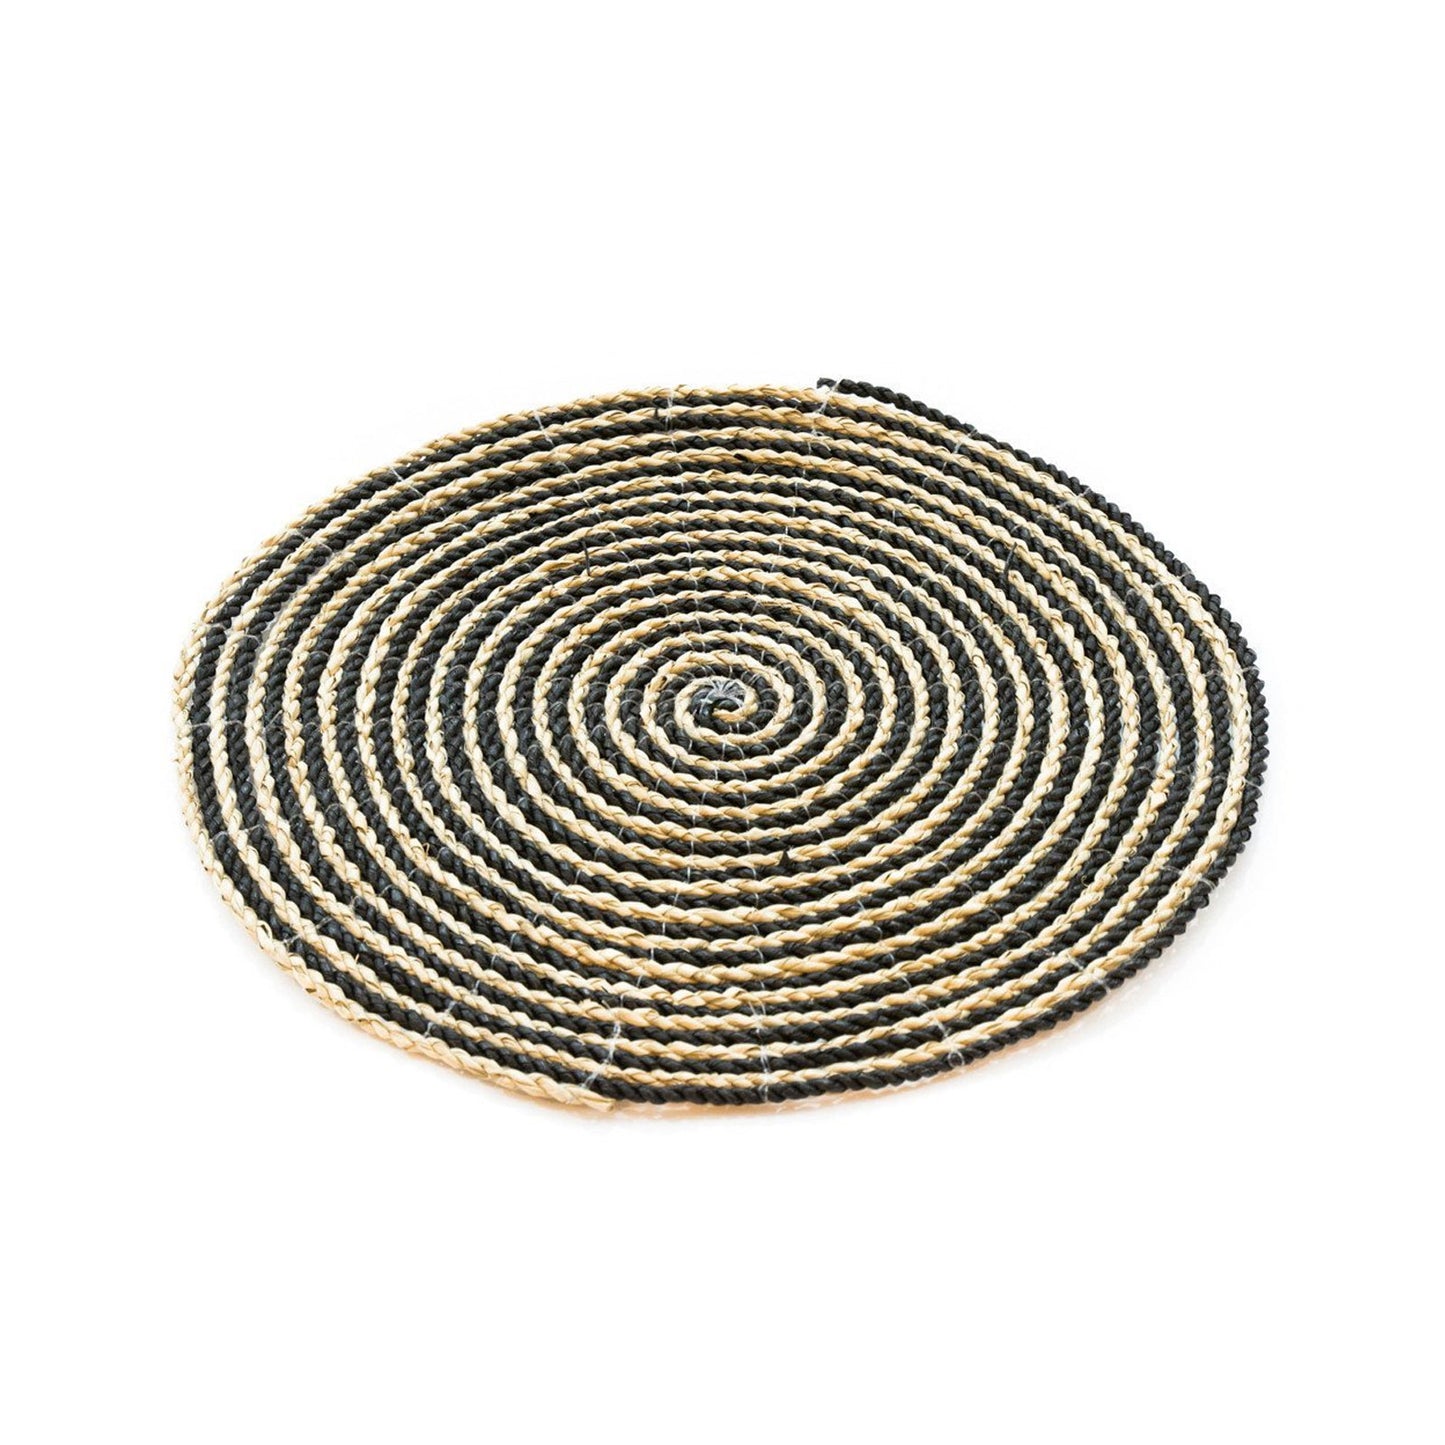 Spiral Seagrass Placemat